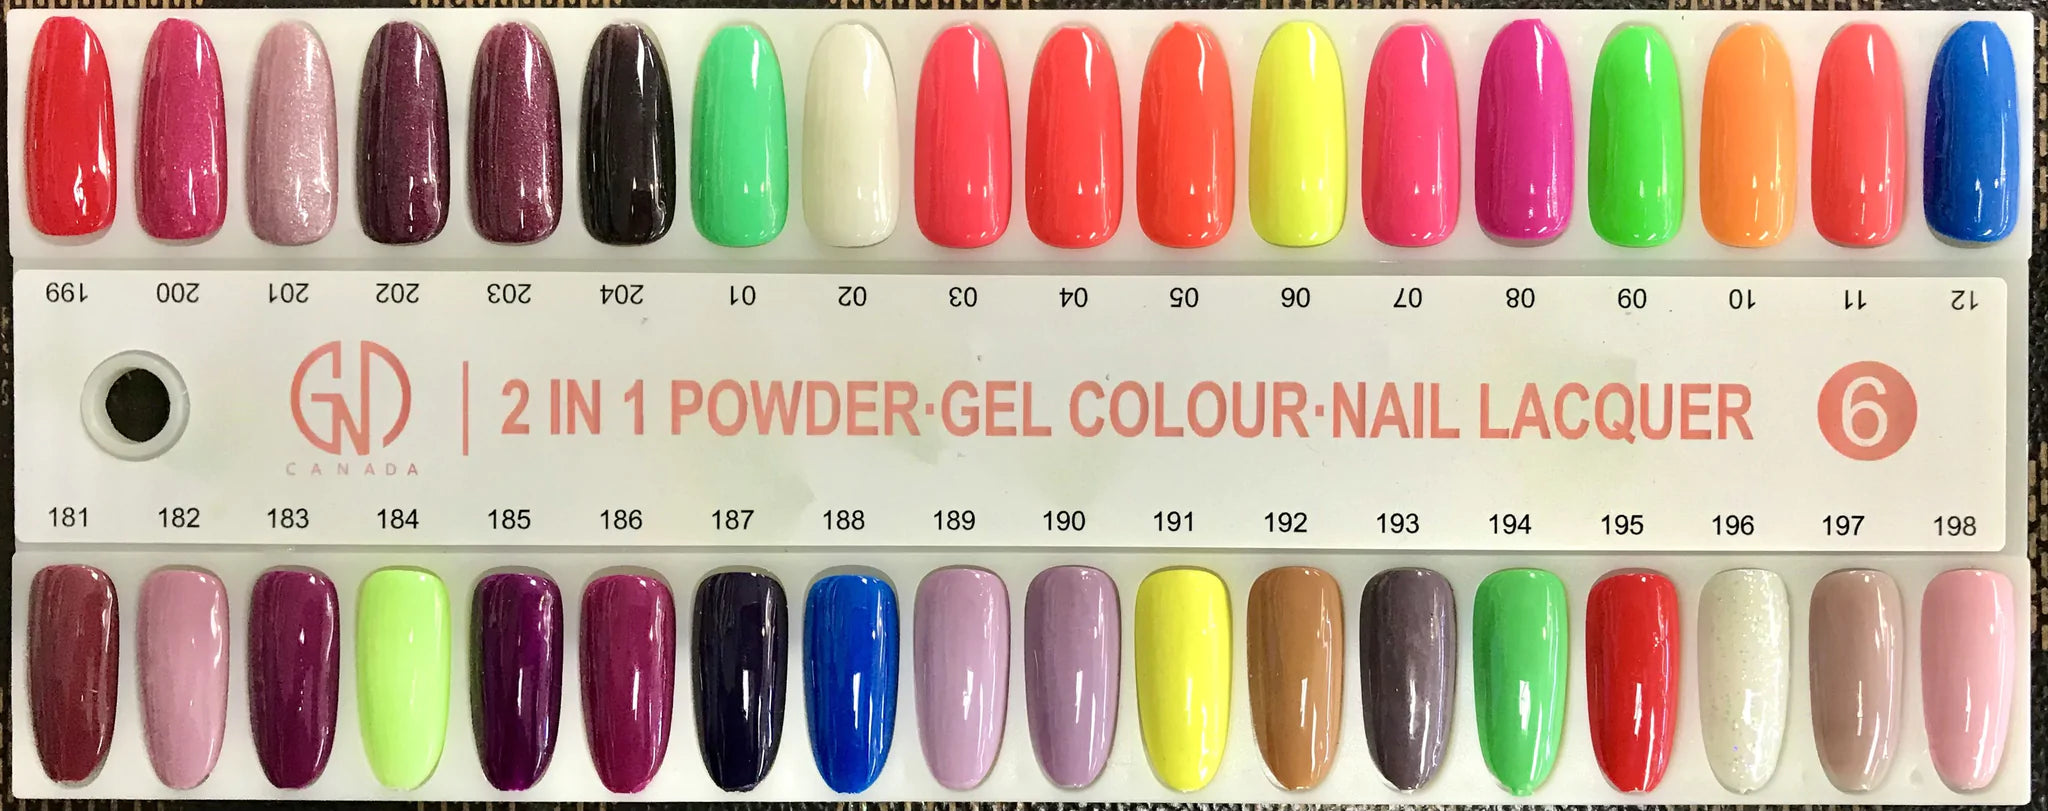 GND Duo Gel & Lacquer 203